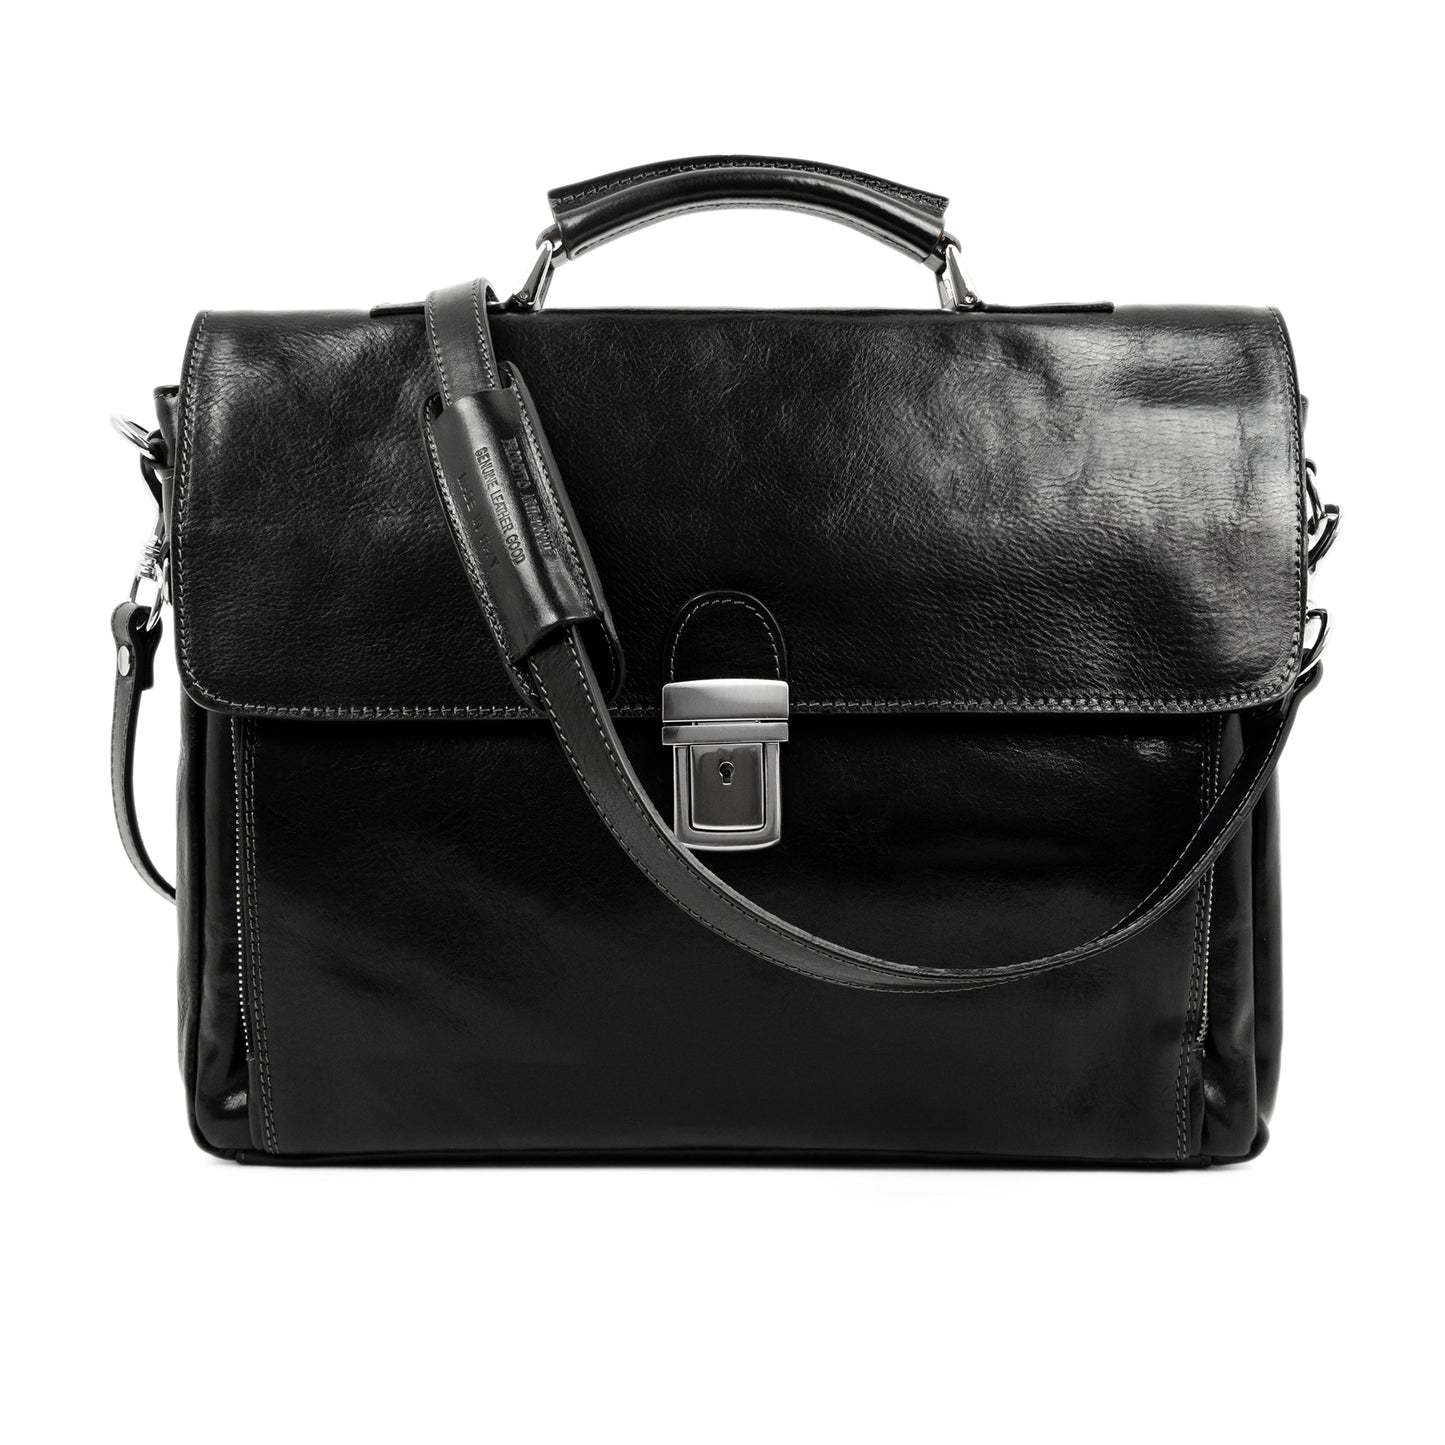 Leather Briefcase Laptop Bag  - In Cold Blood